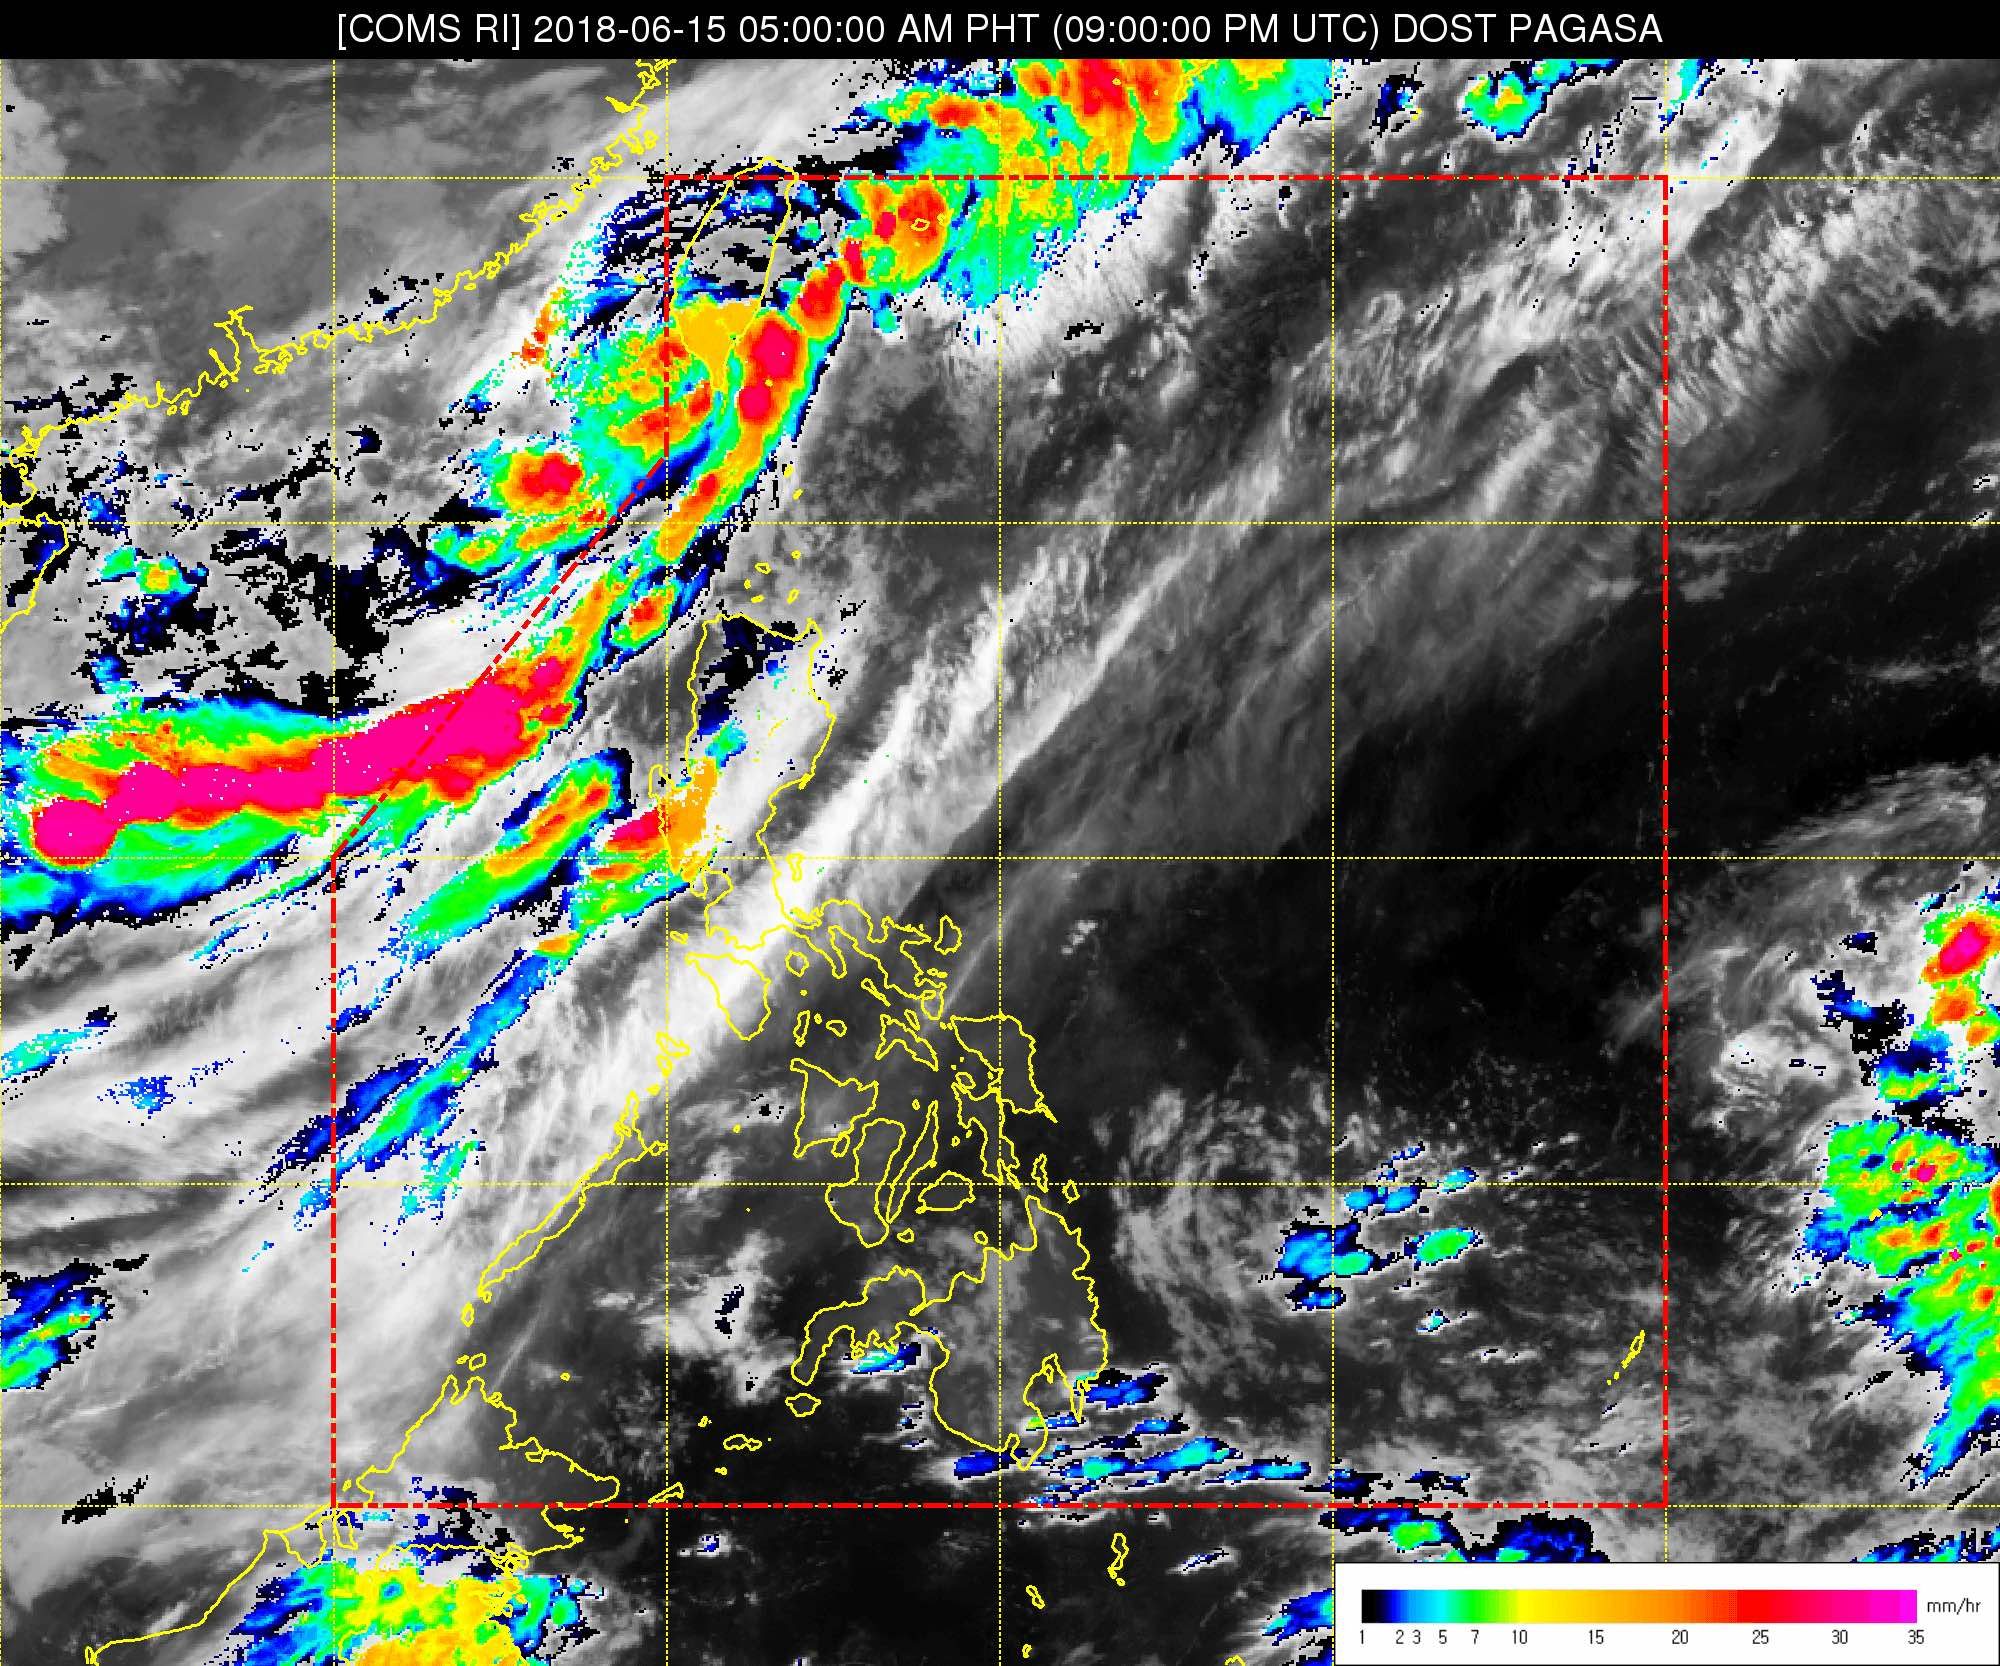 Signal no. 1 lifted in Batanes, but Ester enhancing monsoon